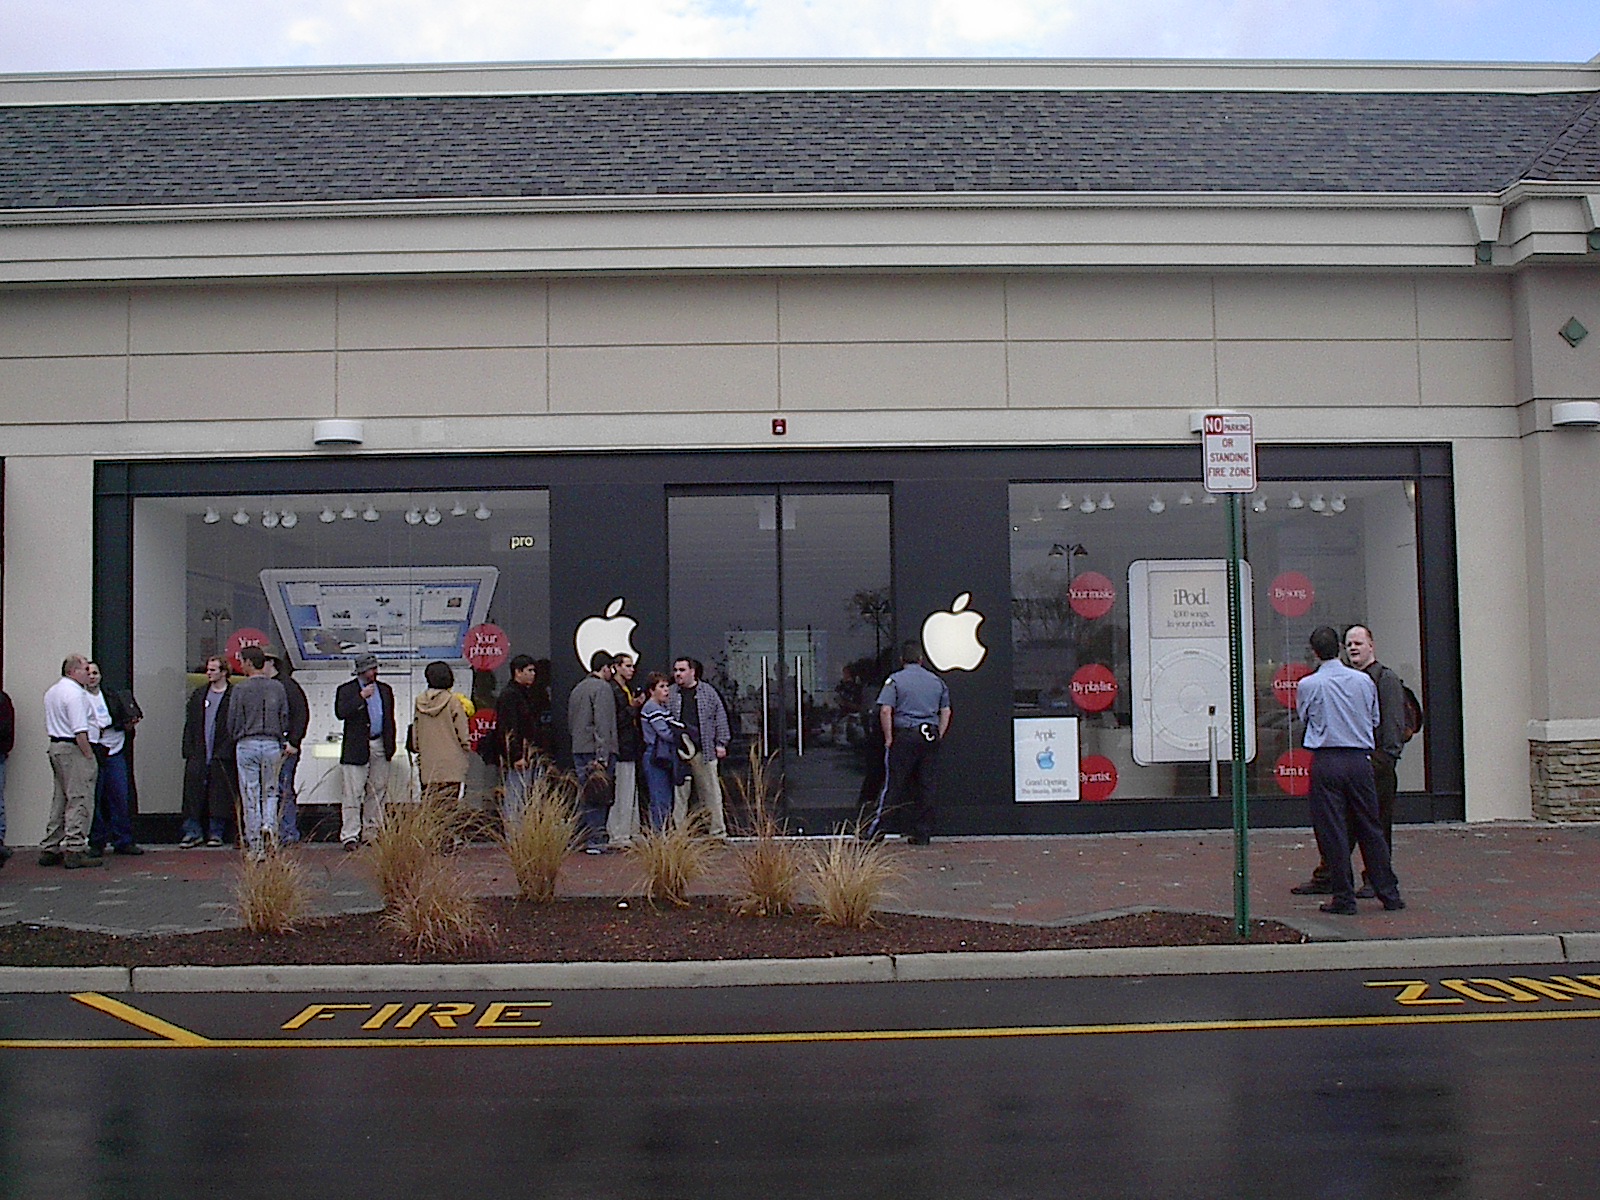 Apple temporarily closes Florida's Waterside Shops store for renovations  starting next month